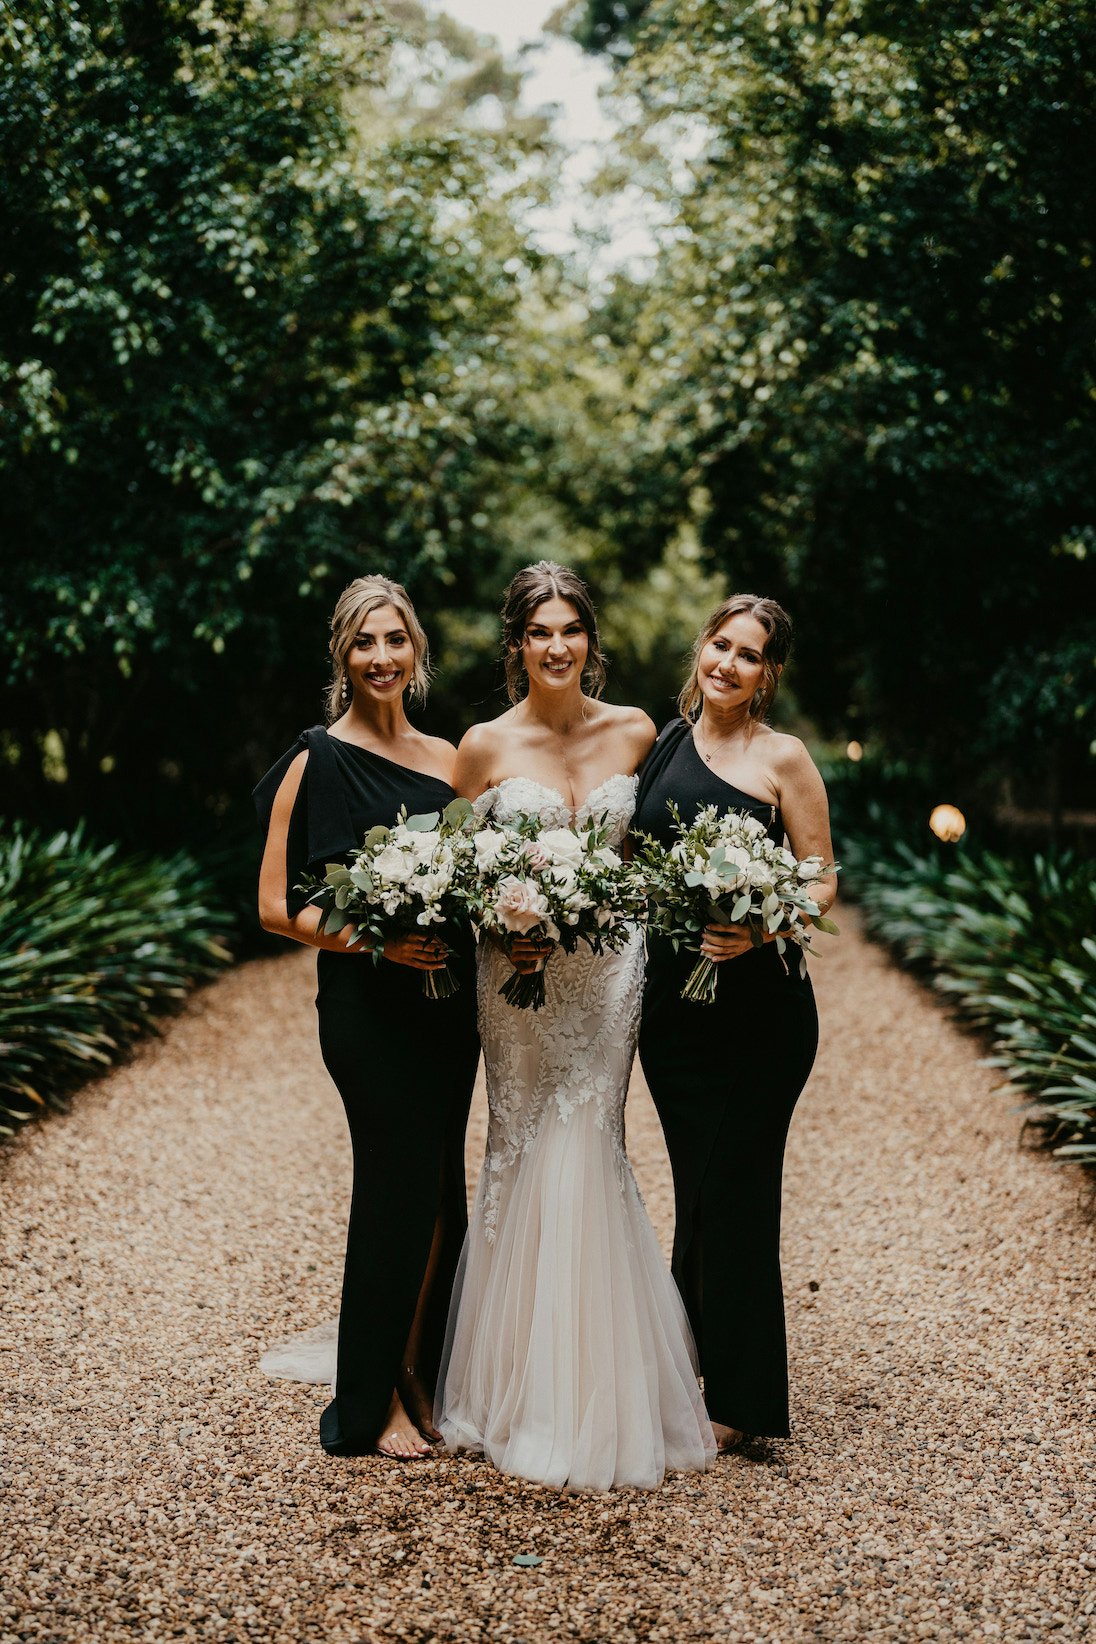 Bride standing in driveway with bridesmaids